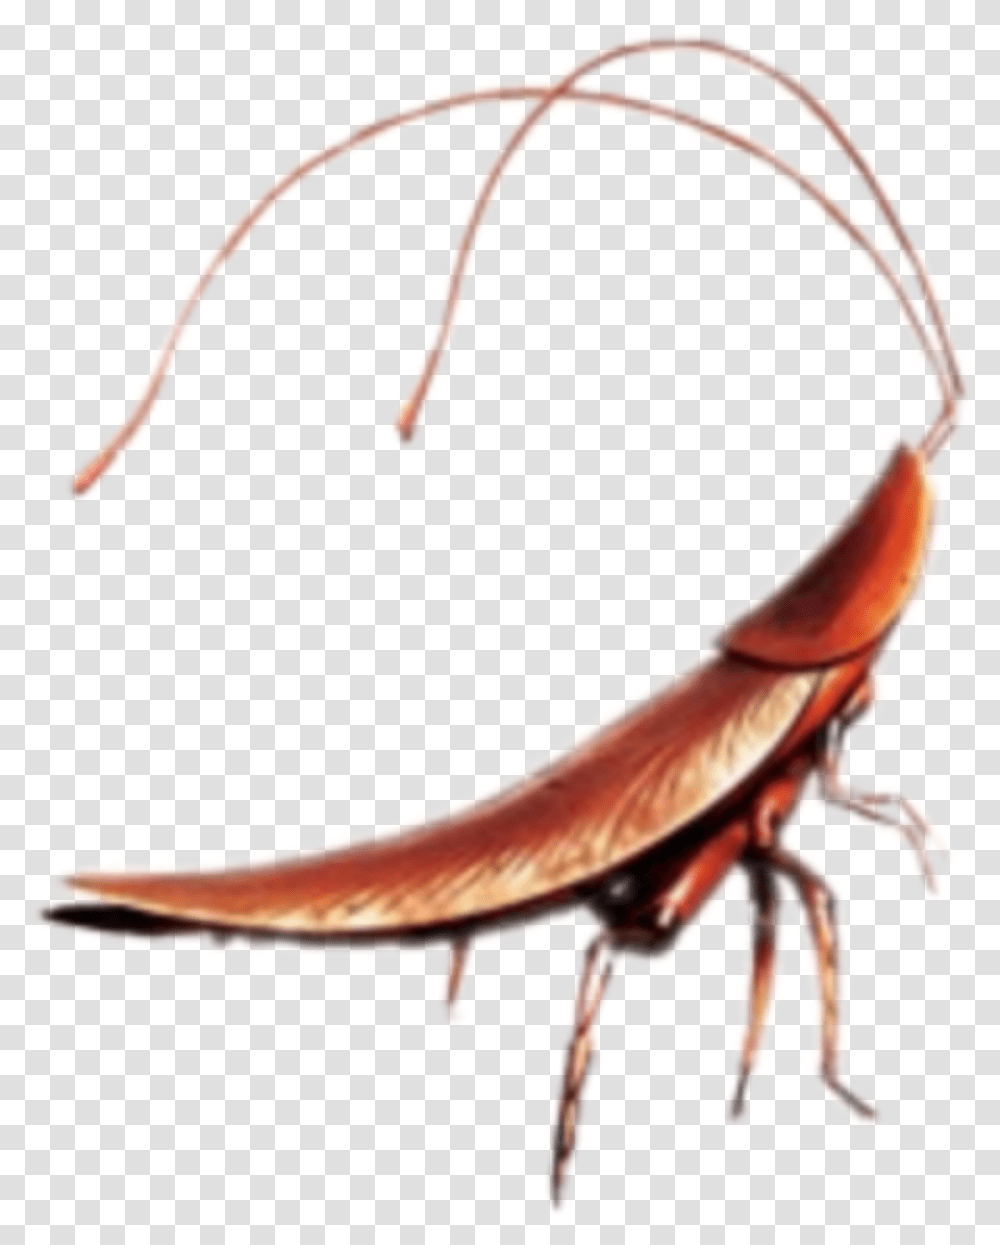 Cockroach Walle Cute Wall E Cockroach, Animal, Invertebrate, Insect, Person Transparent Png